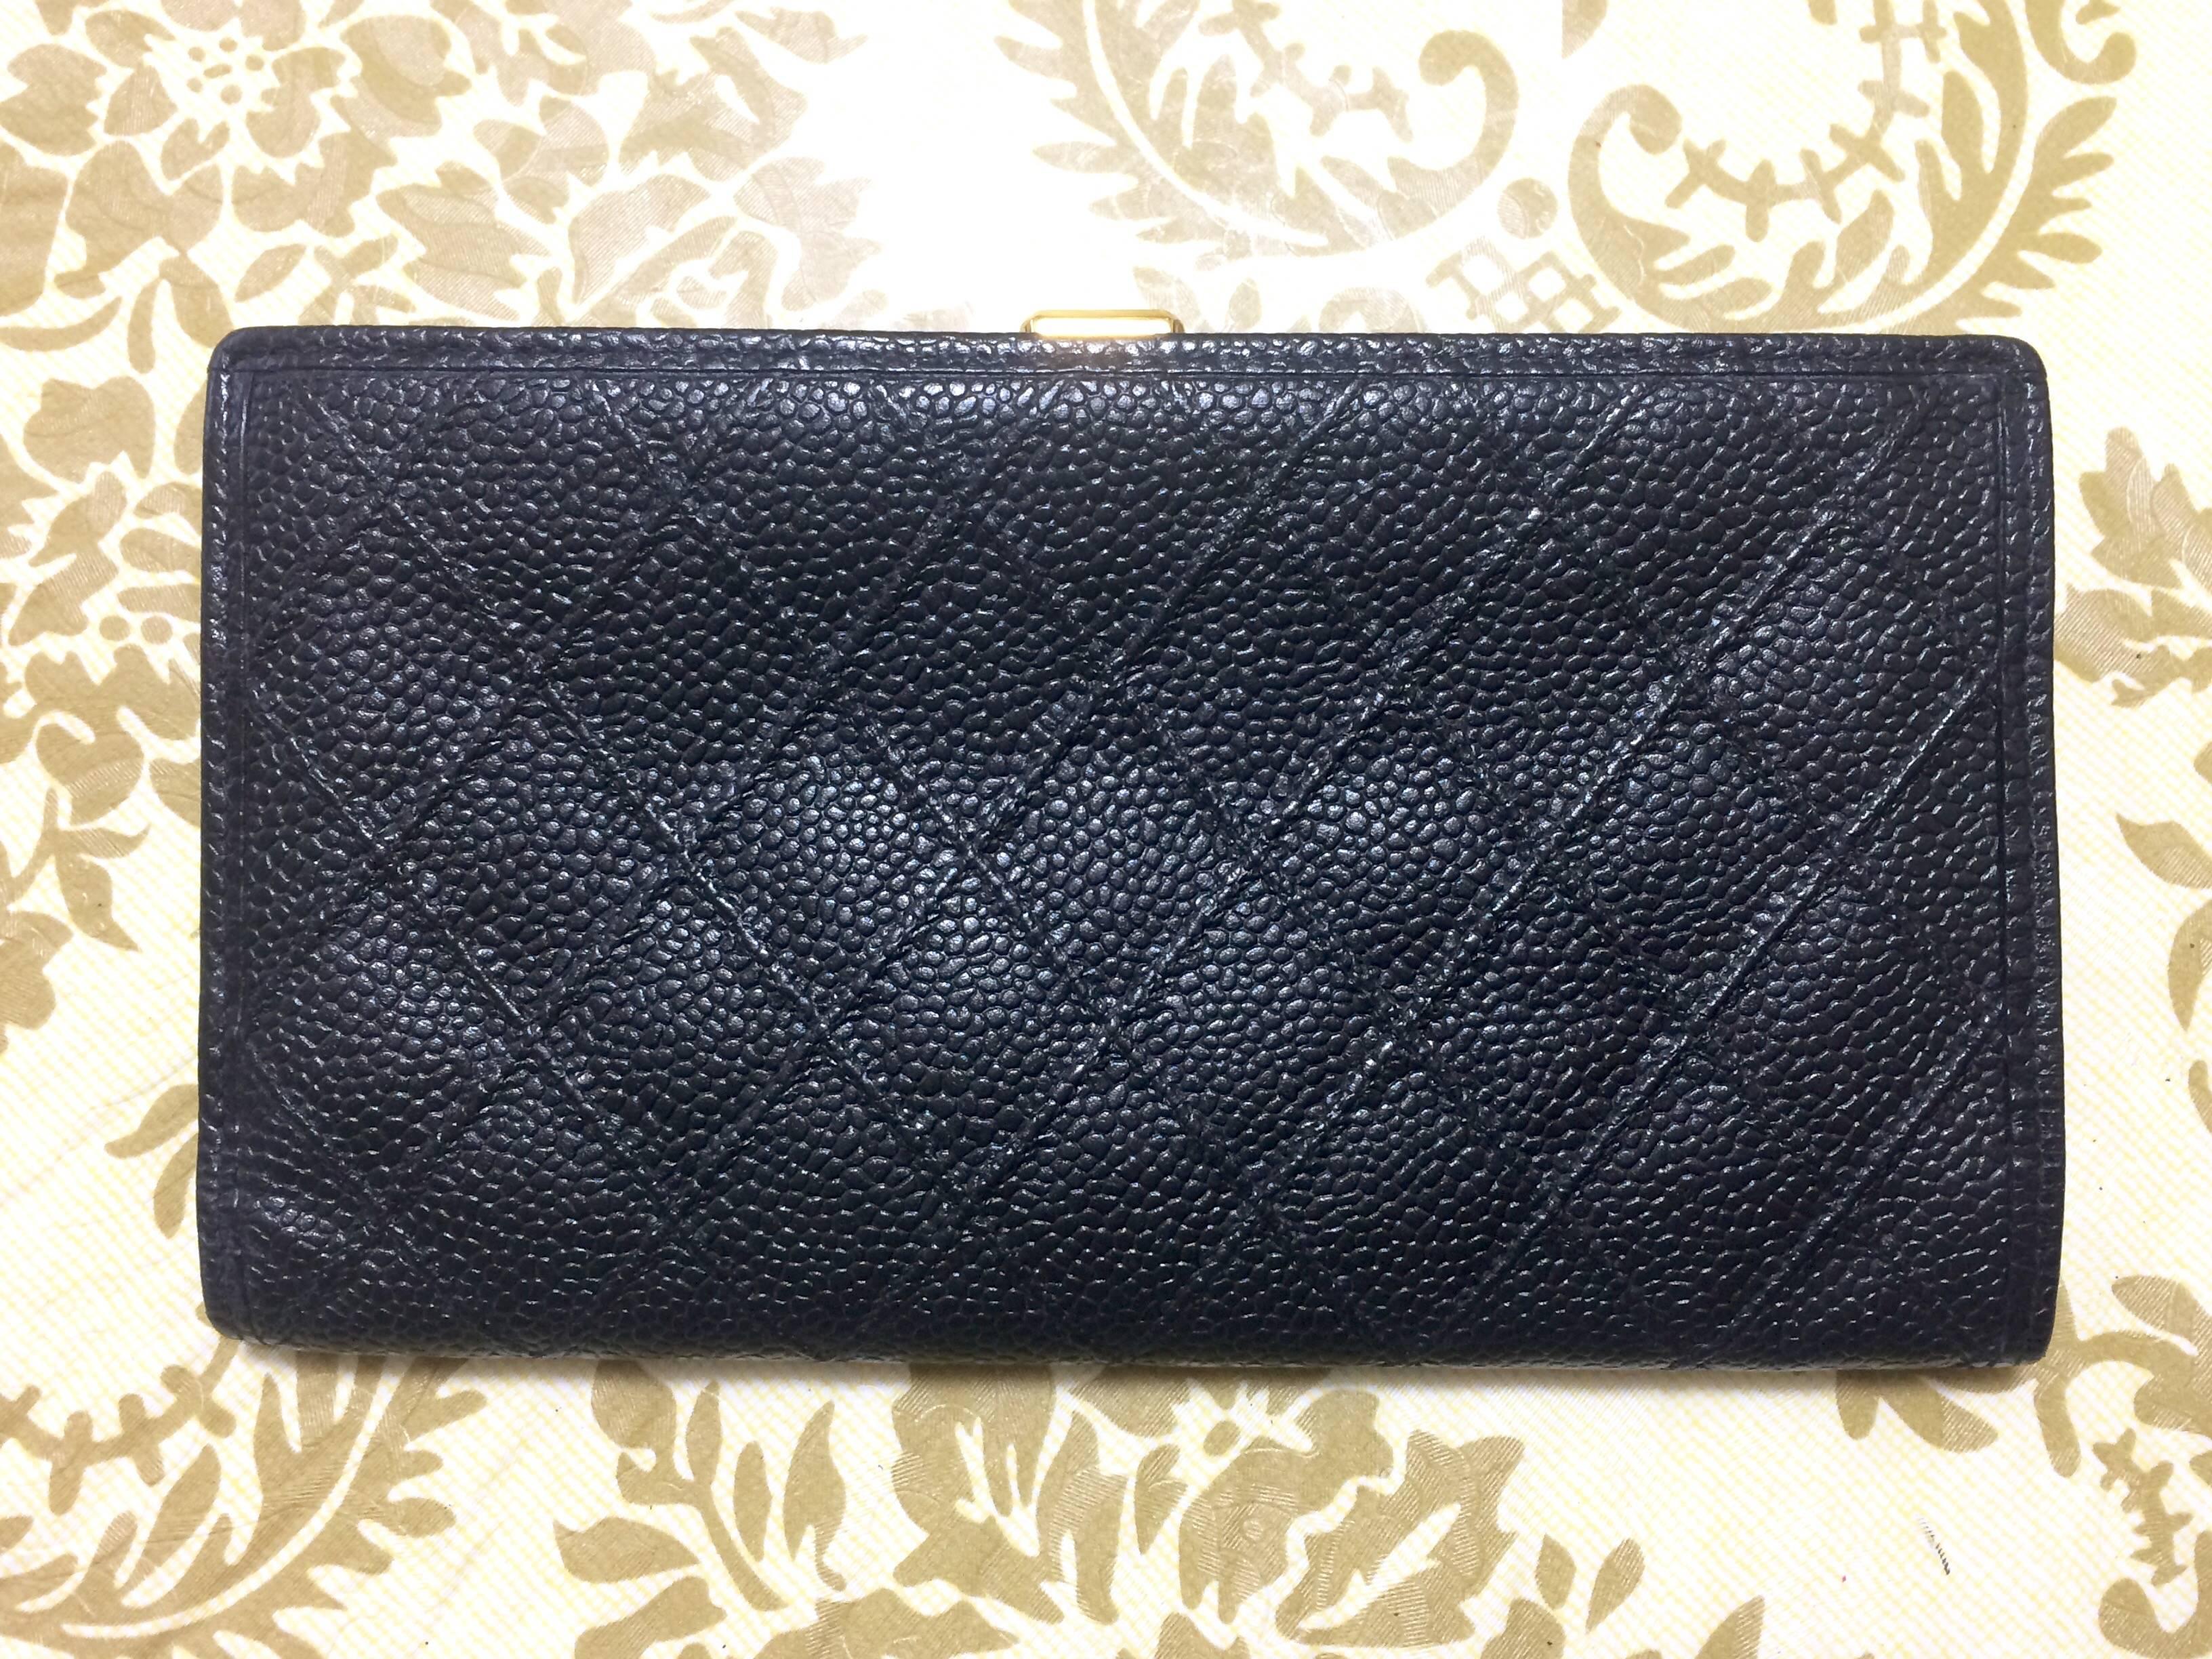 1990s. Vintage CHANEL black caviar leather wallet with stitches and gold tone CC motif. Perfect gift.

This is a CHANEL vintage wallet in black caviar leather from the 90's. 
Very sophisticated looking and something that would never go out of